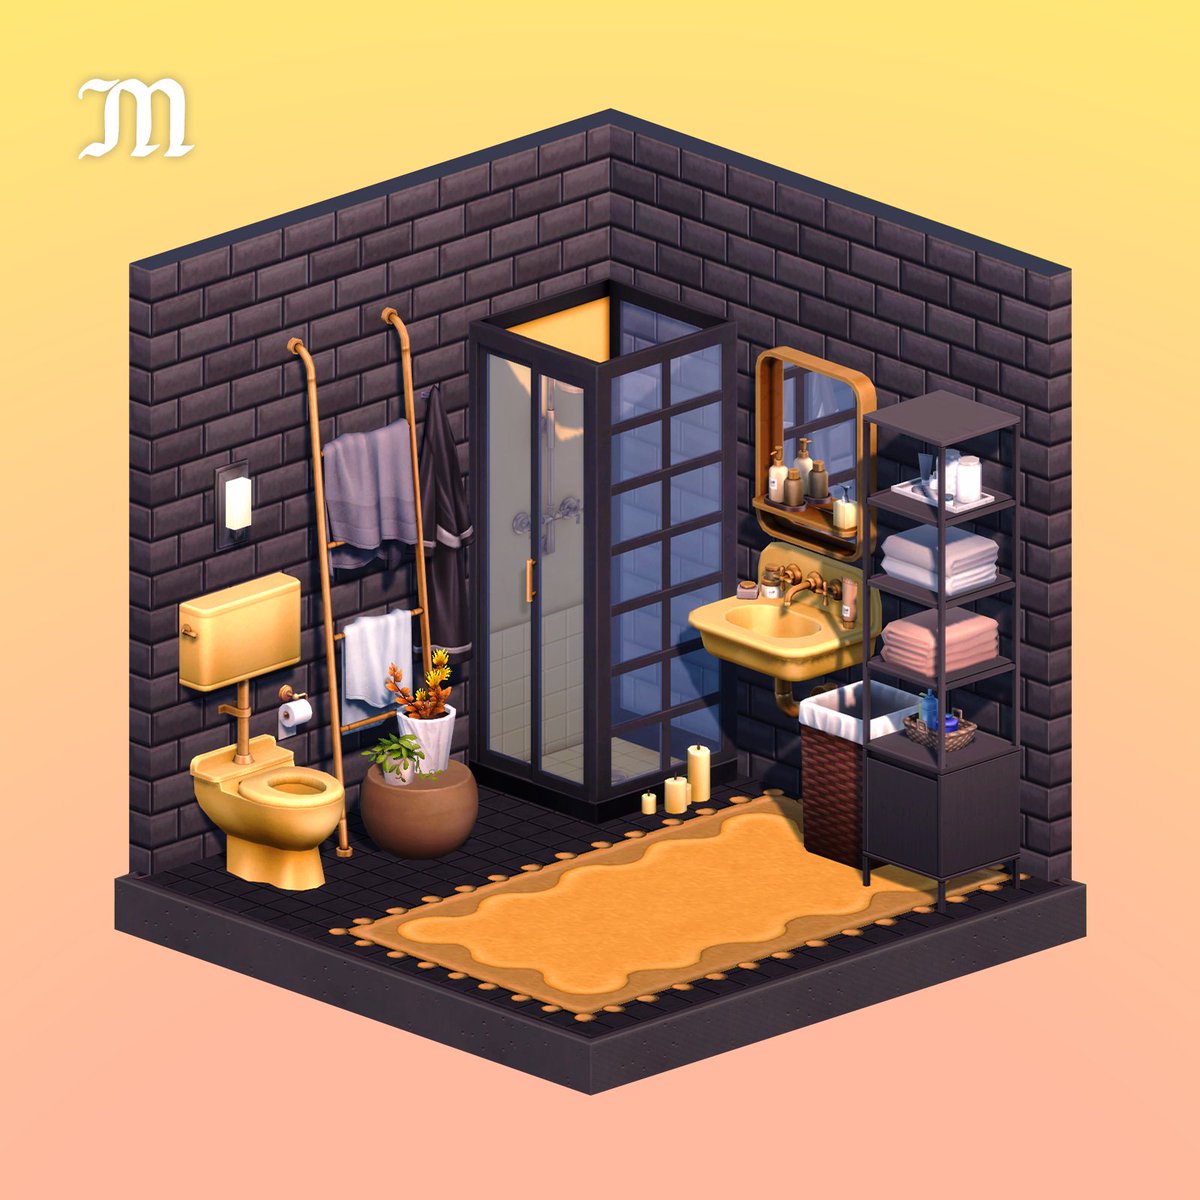 Rosa Bathroom items come in a variety of cute swatches🌞 Hope you've been enjoying this set! ✨Get the set for free at myshunosun.com #TheSims4 @TheSims #EApartner #ts4cc